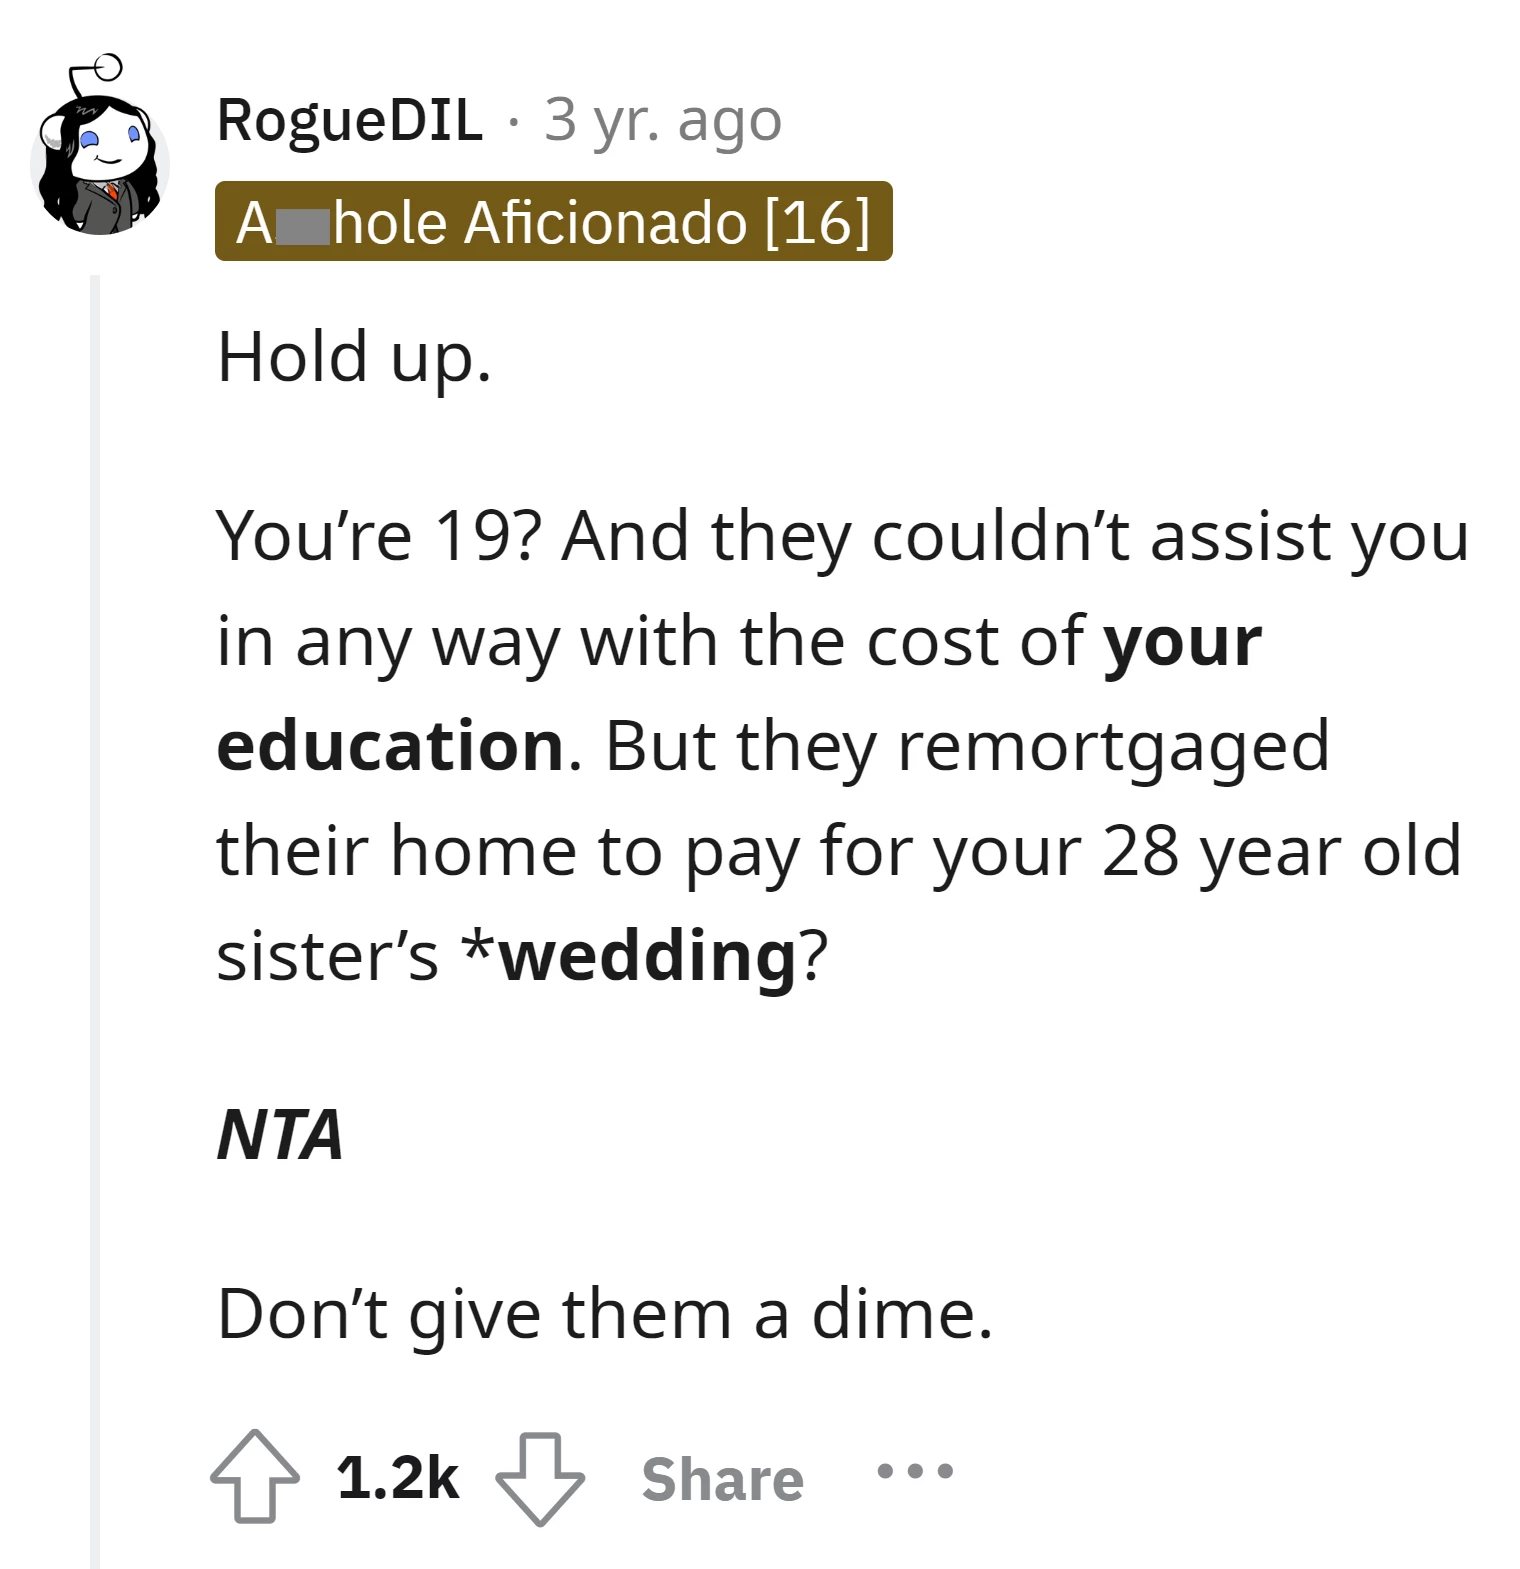 Commenter advises the OP not to give them any money